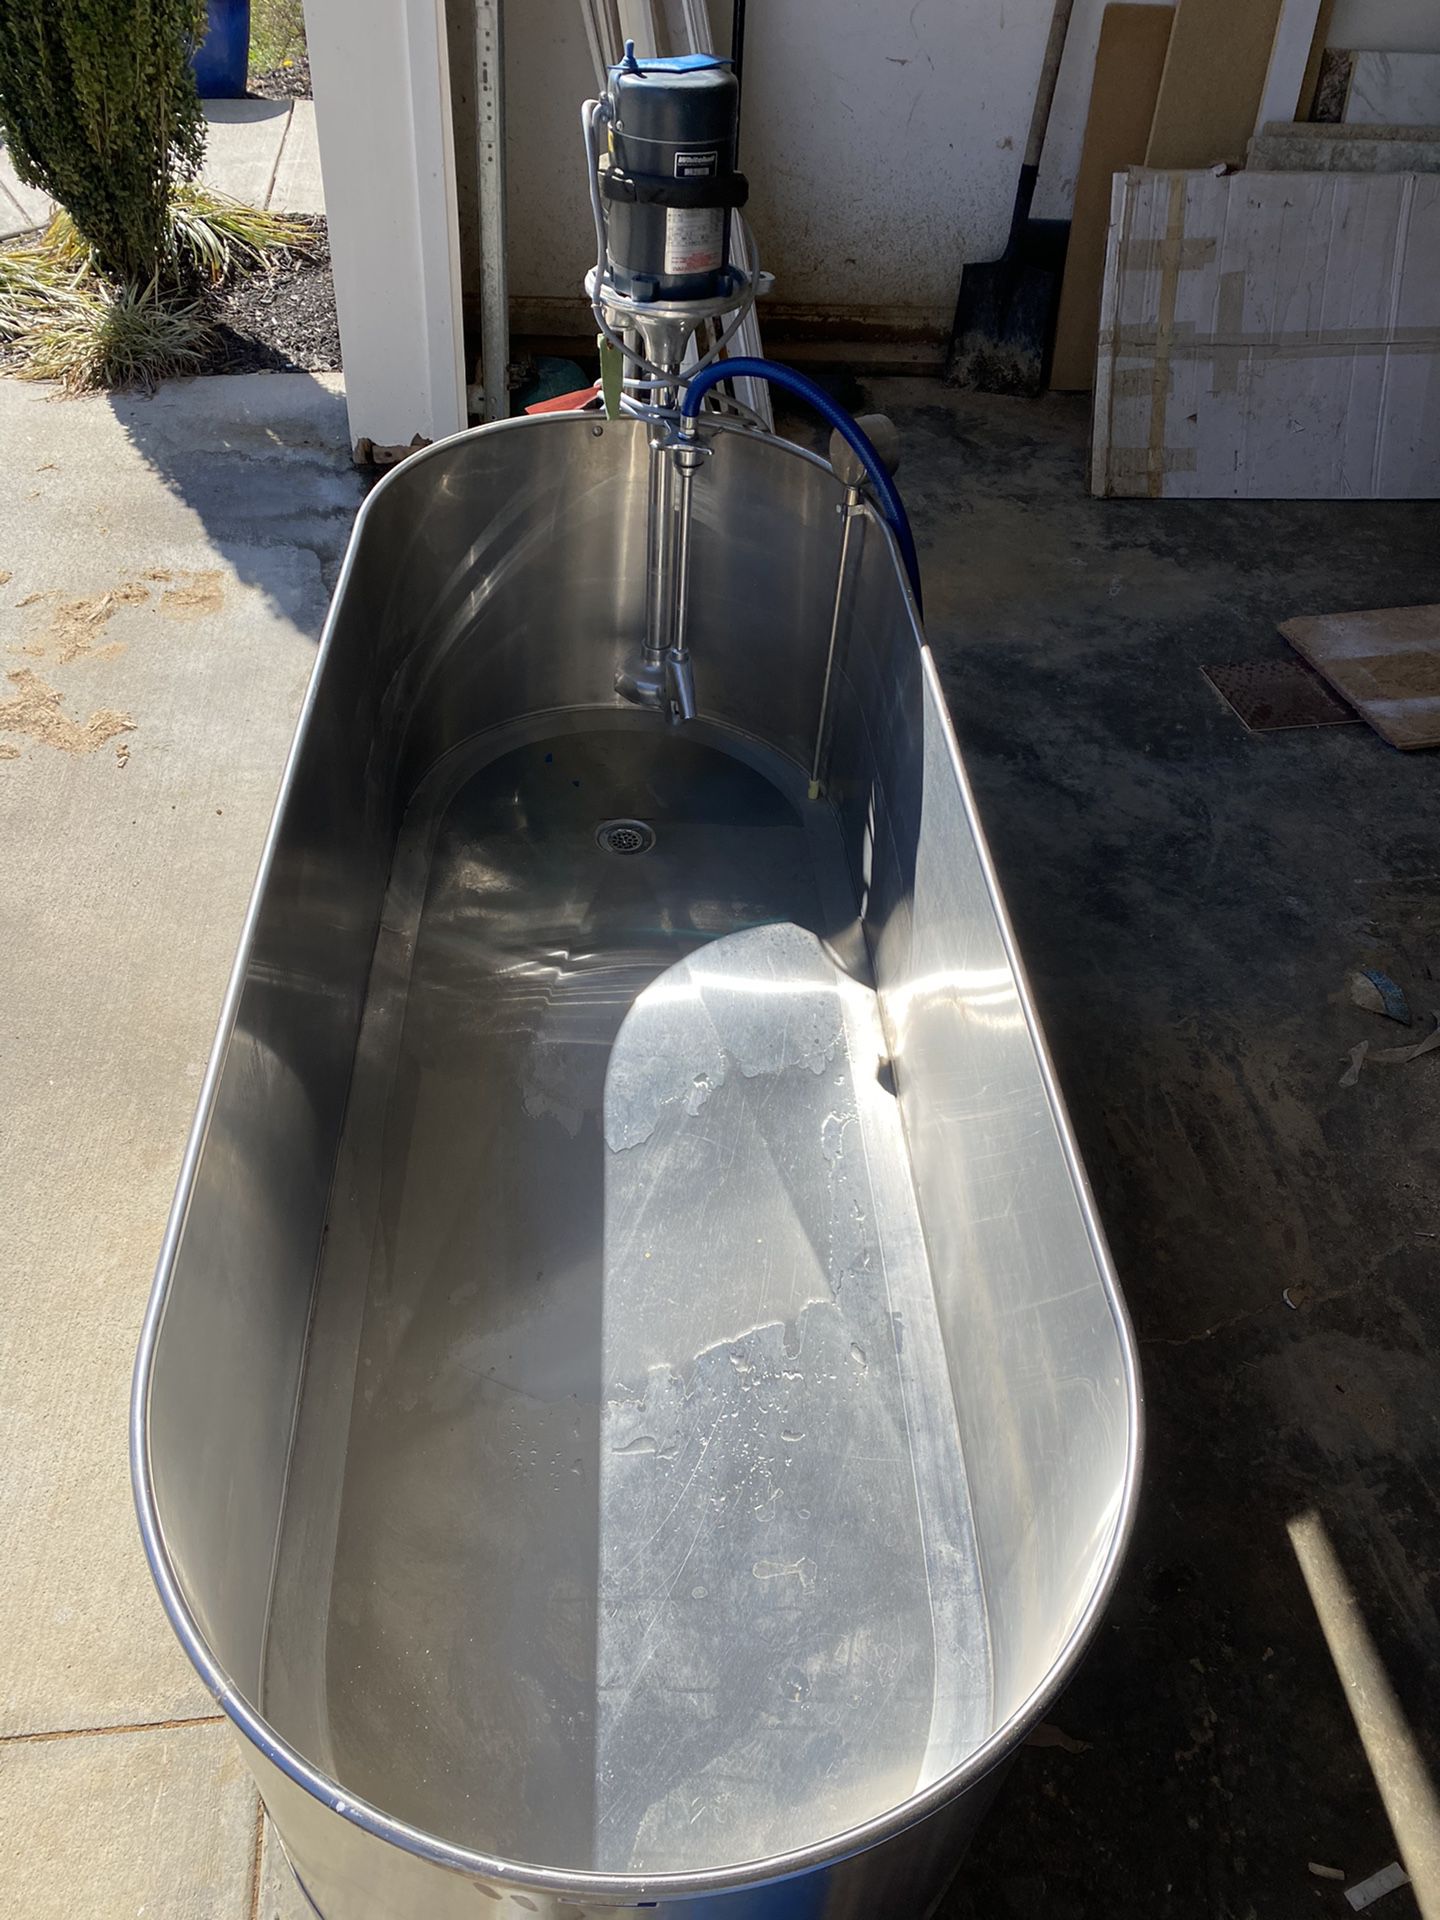 Hydrotherapy Whirlpool Tub For sale Or Trade Last Welcome 